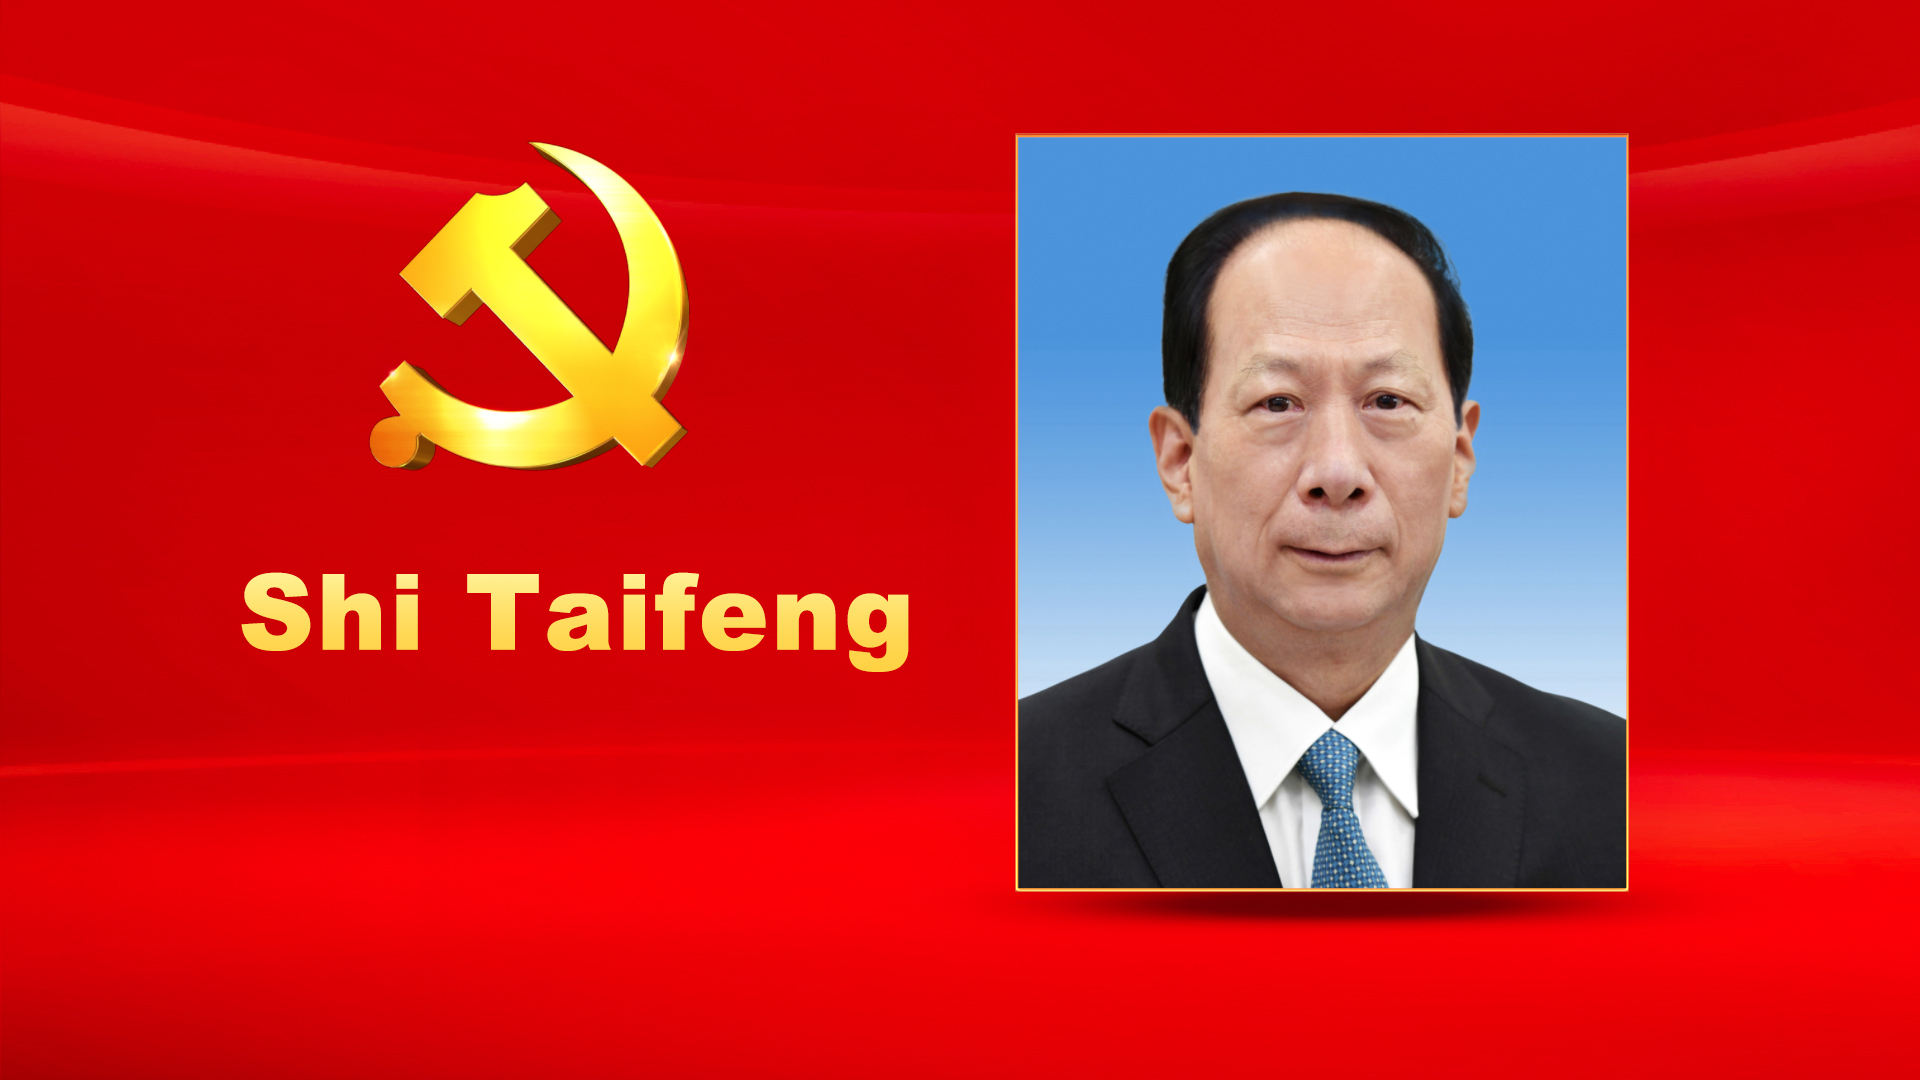 Shi Taifeng, male, Han ethnicity, was born in September 1956 and is from Yushe, Shanxi Province. He began his first job in May 1974 and joined the Communist Party of China (CPC) in June 1982. He graduated from Law Department, Peking University where he completed a graduate program in basic theories of law. He holds a Master of Laws degree and a professional title of professor. Shi is currently a member of the CPC Central Committee Political Bureau, a member of the CPC Central Committee Secretariat, Vice Chairman of the Education, Science, Culture, and Public Health Committee of the 13th National People's Congress, and President and Leading Party Members Group Secretary of the Chinese Academy of Social Sciences.